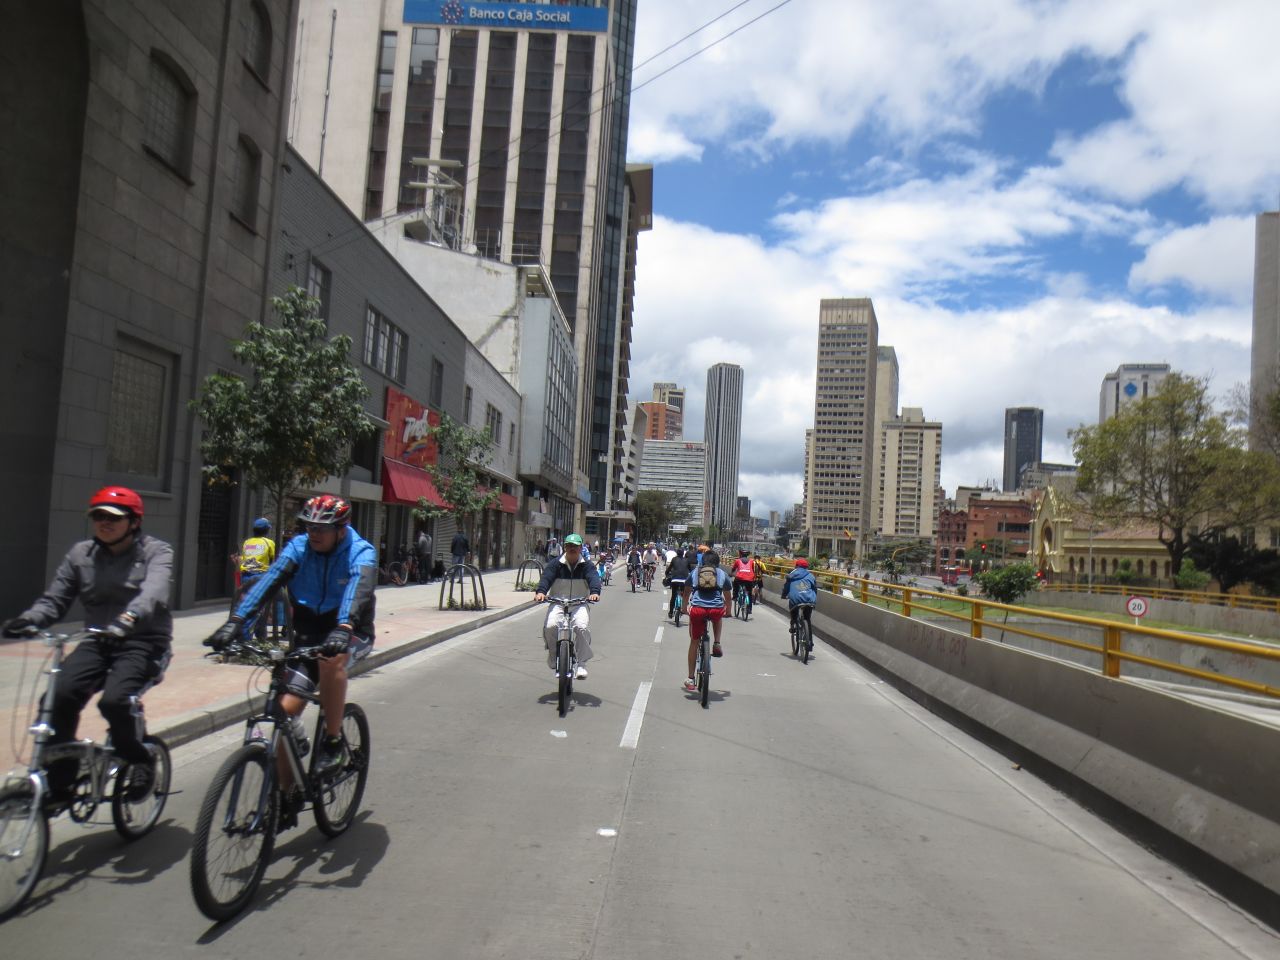 Only 5% of Bogota's journeys involve bikes, but the city makes our list in recognition of its efforts to change. Each Sunday, 70 miles of street close down to vehicles to give way to pedestrians and bikes. 